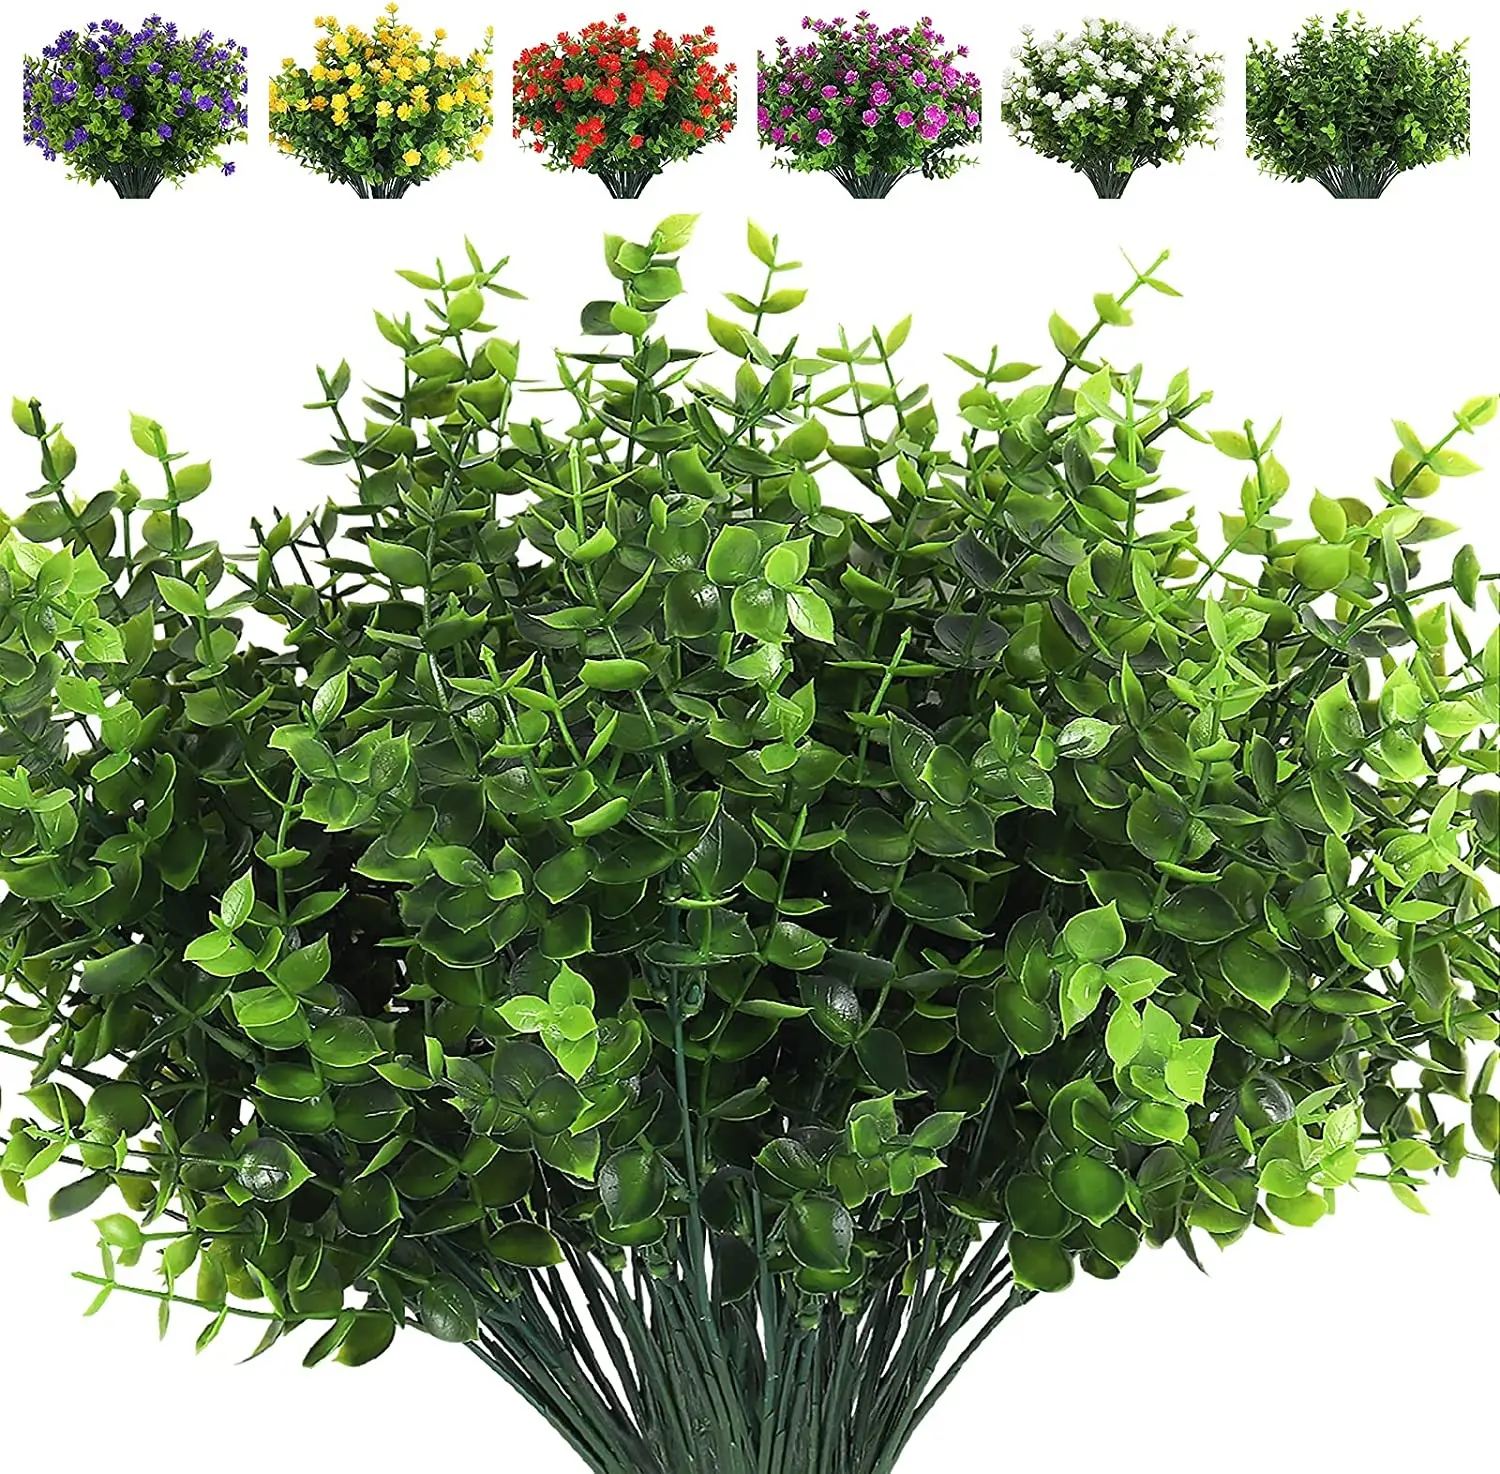 Wholesale Artificial Plastic Eucalyptus Leaf Real Touch 7 Branches Eucalyptus Leaves Stem For Decor